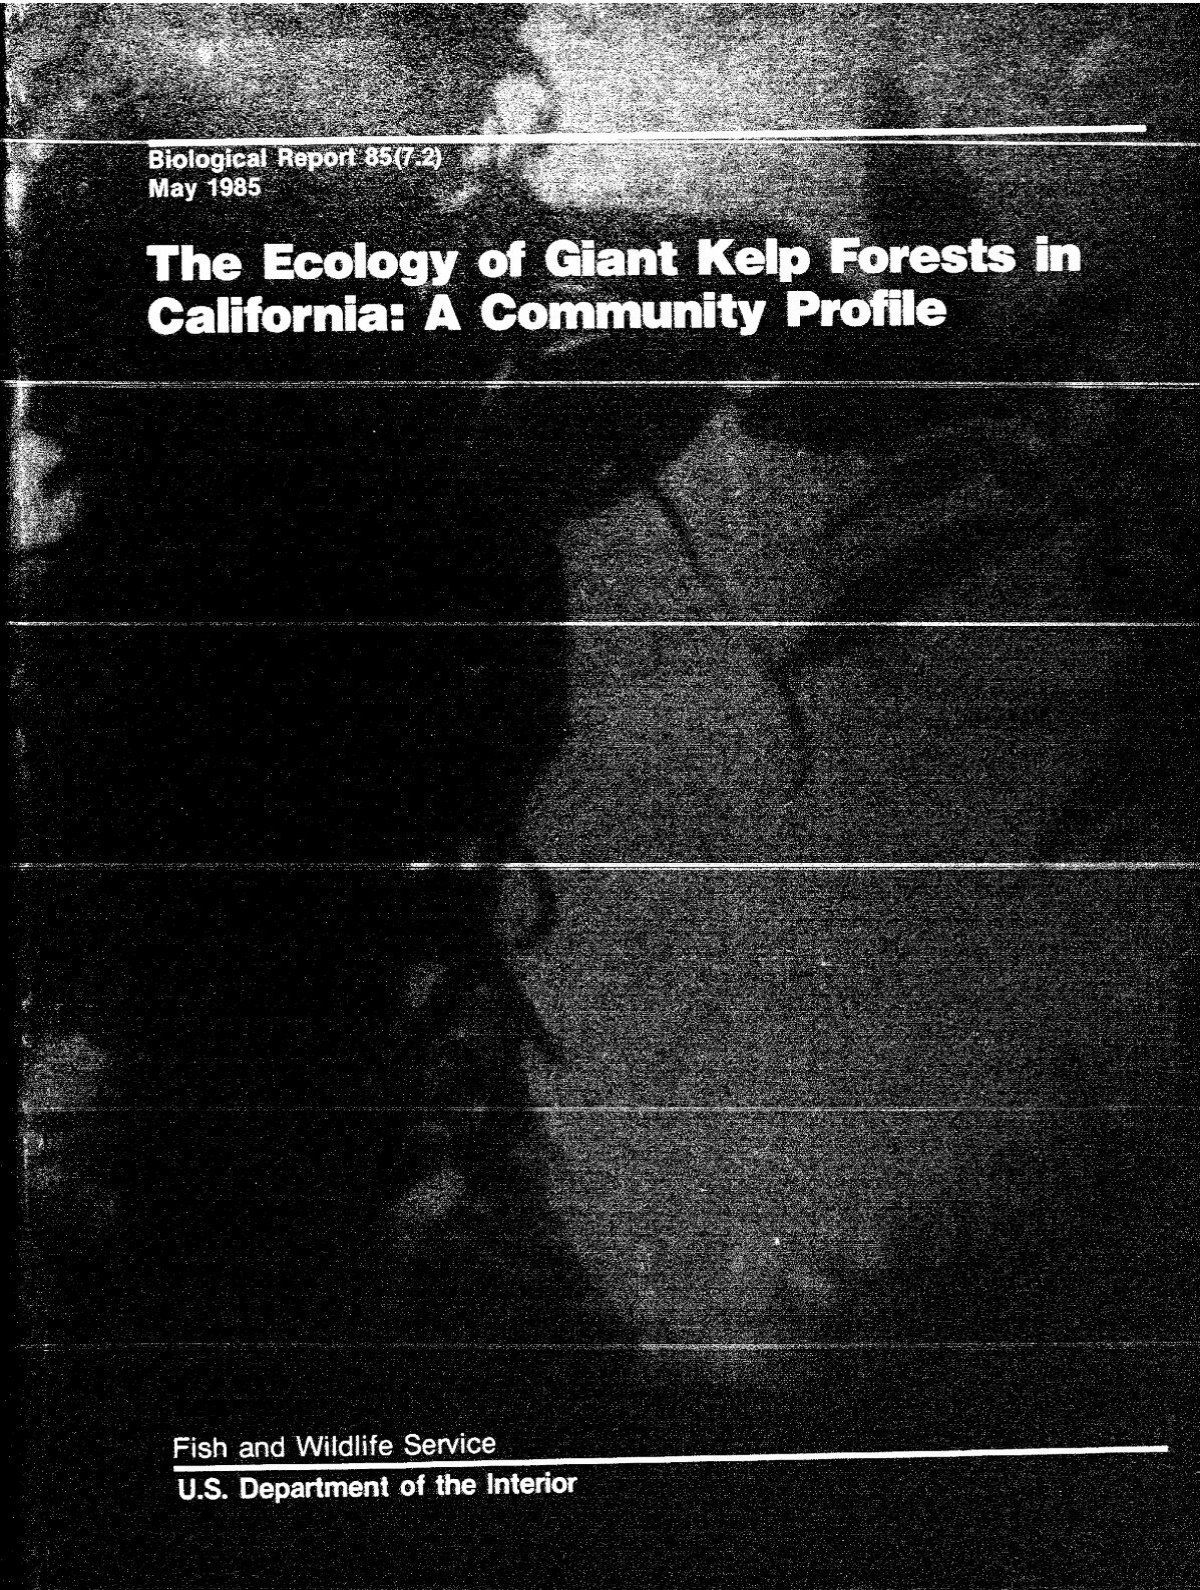 The ecology of giant kelp forests in California - USGS National